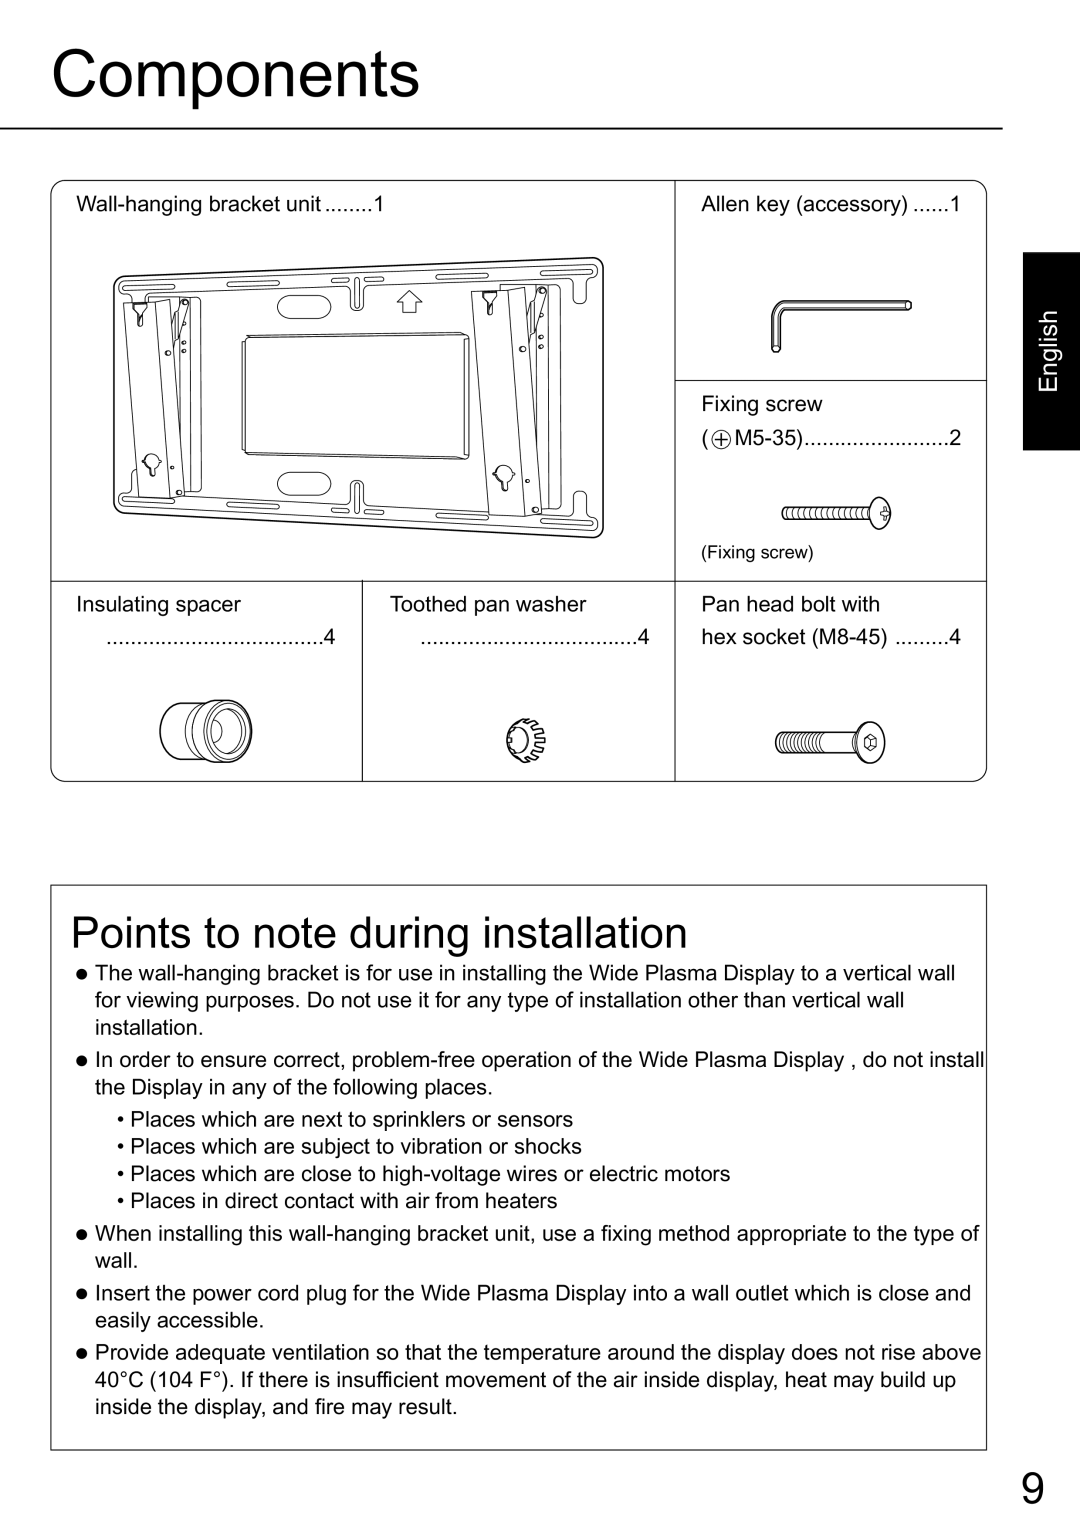 JVC TS-C50P2G, TS-C50P6G manual Components, Points to note during installation, English 